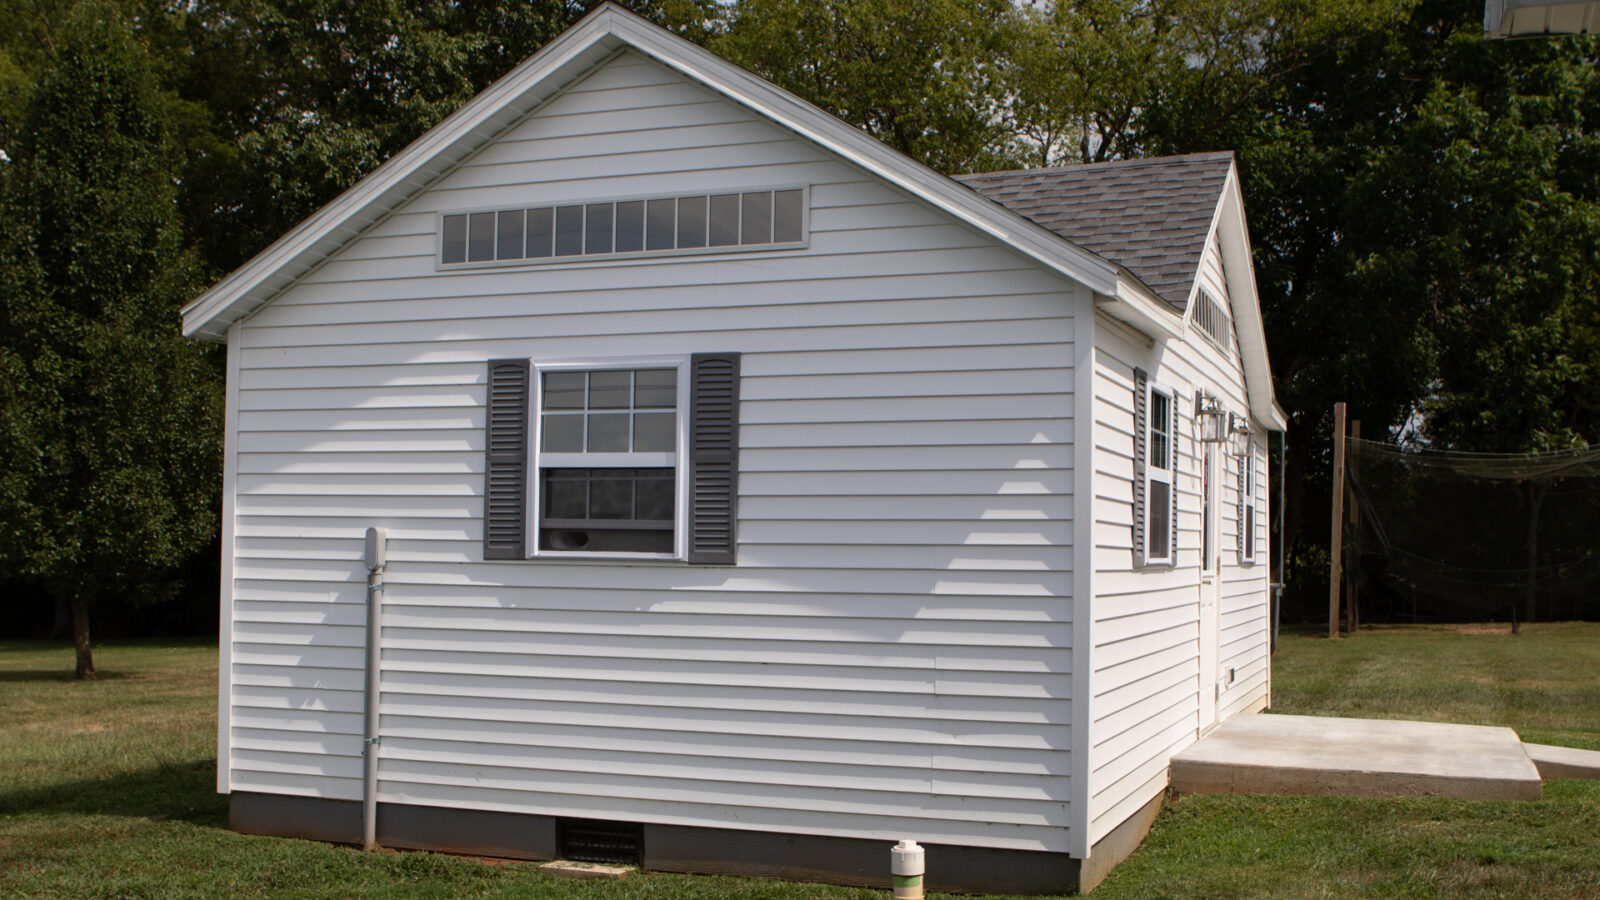 Affordable tiny house shells from Esh's Utility Buildings.